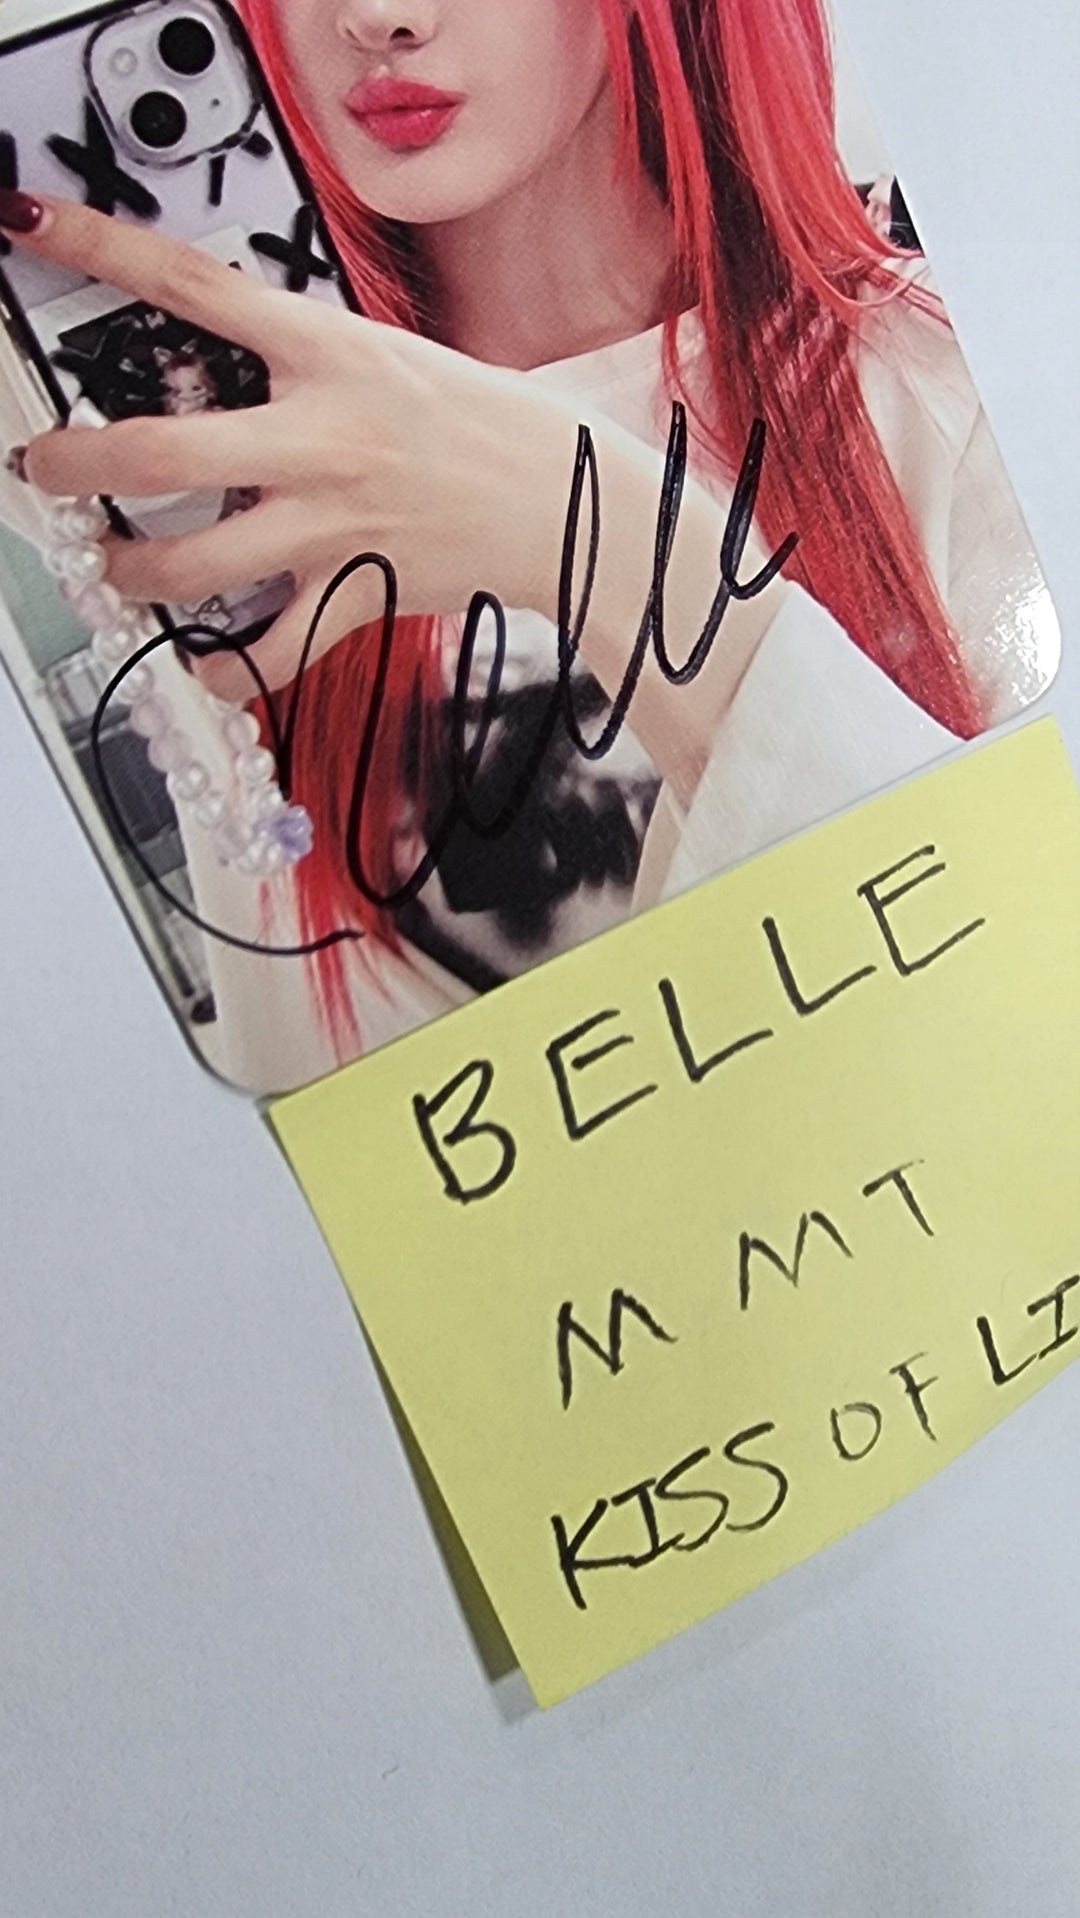 BELLE (Of KISS OF LIFE) "Born to be XX" - Hand Autographed(Signed) Photocard [23.12.11]